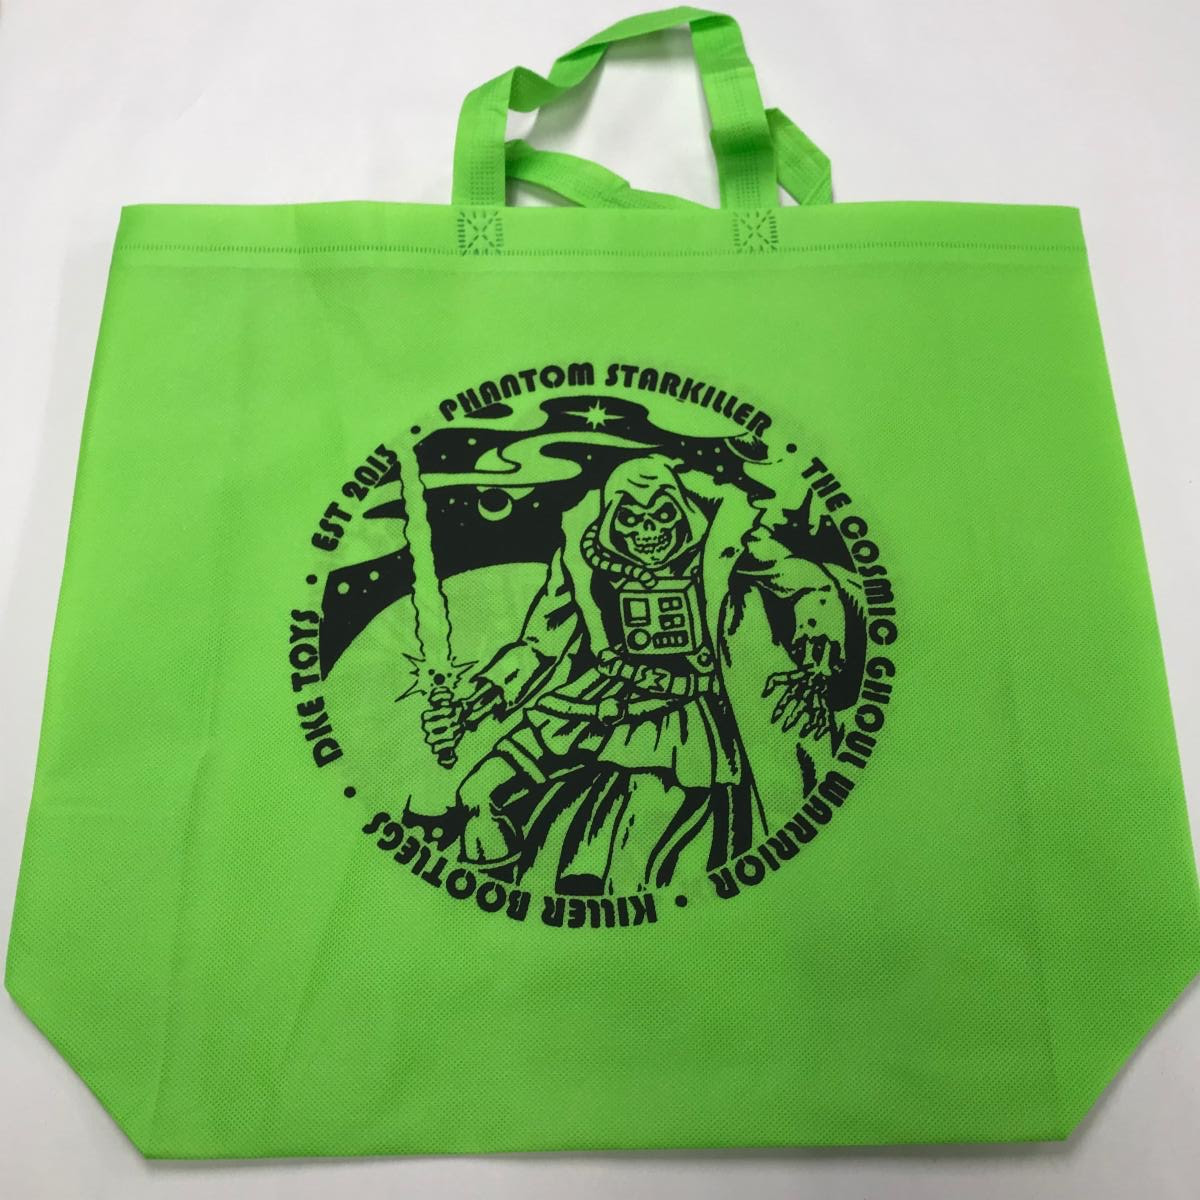 Free Killer Bootlegs Phantom Starkiller tote bag with purchase! (front pictured)